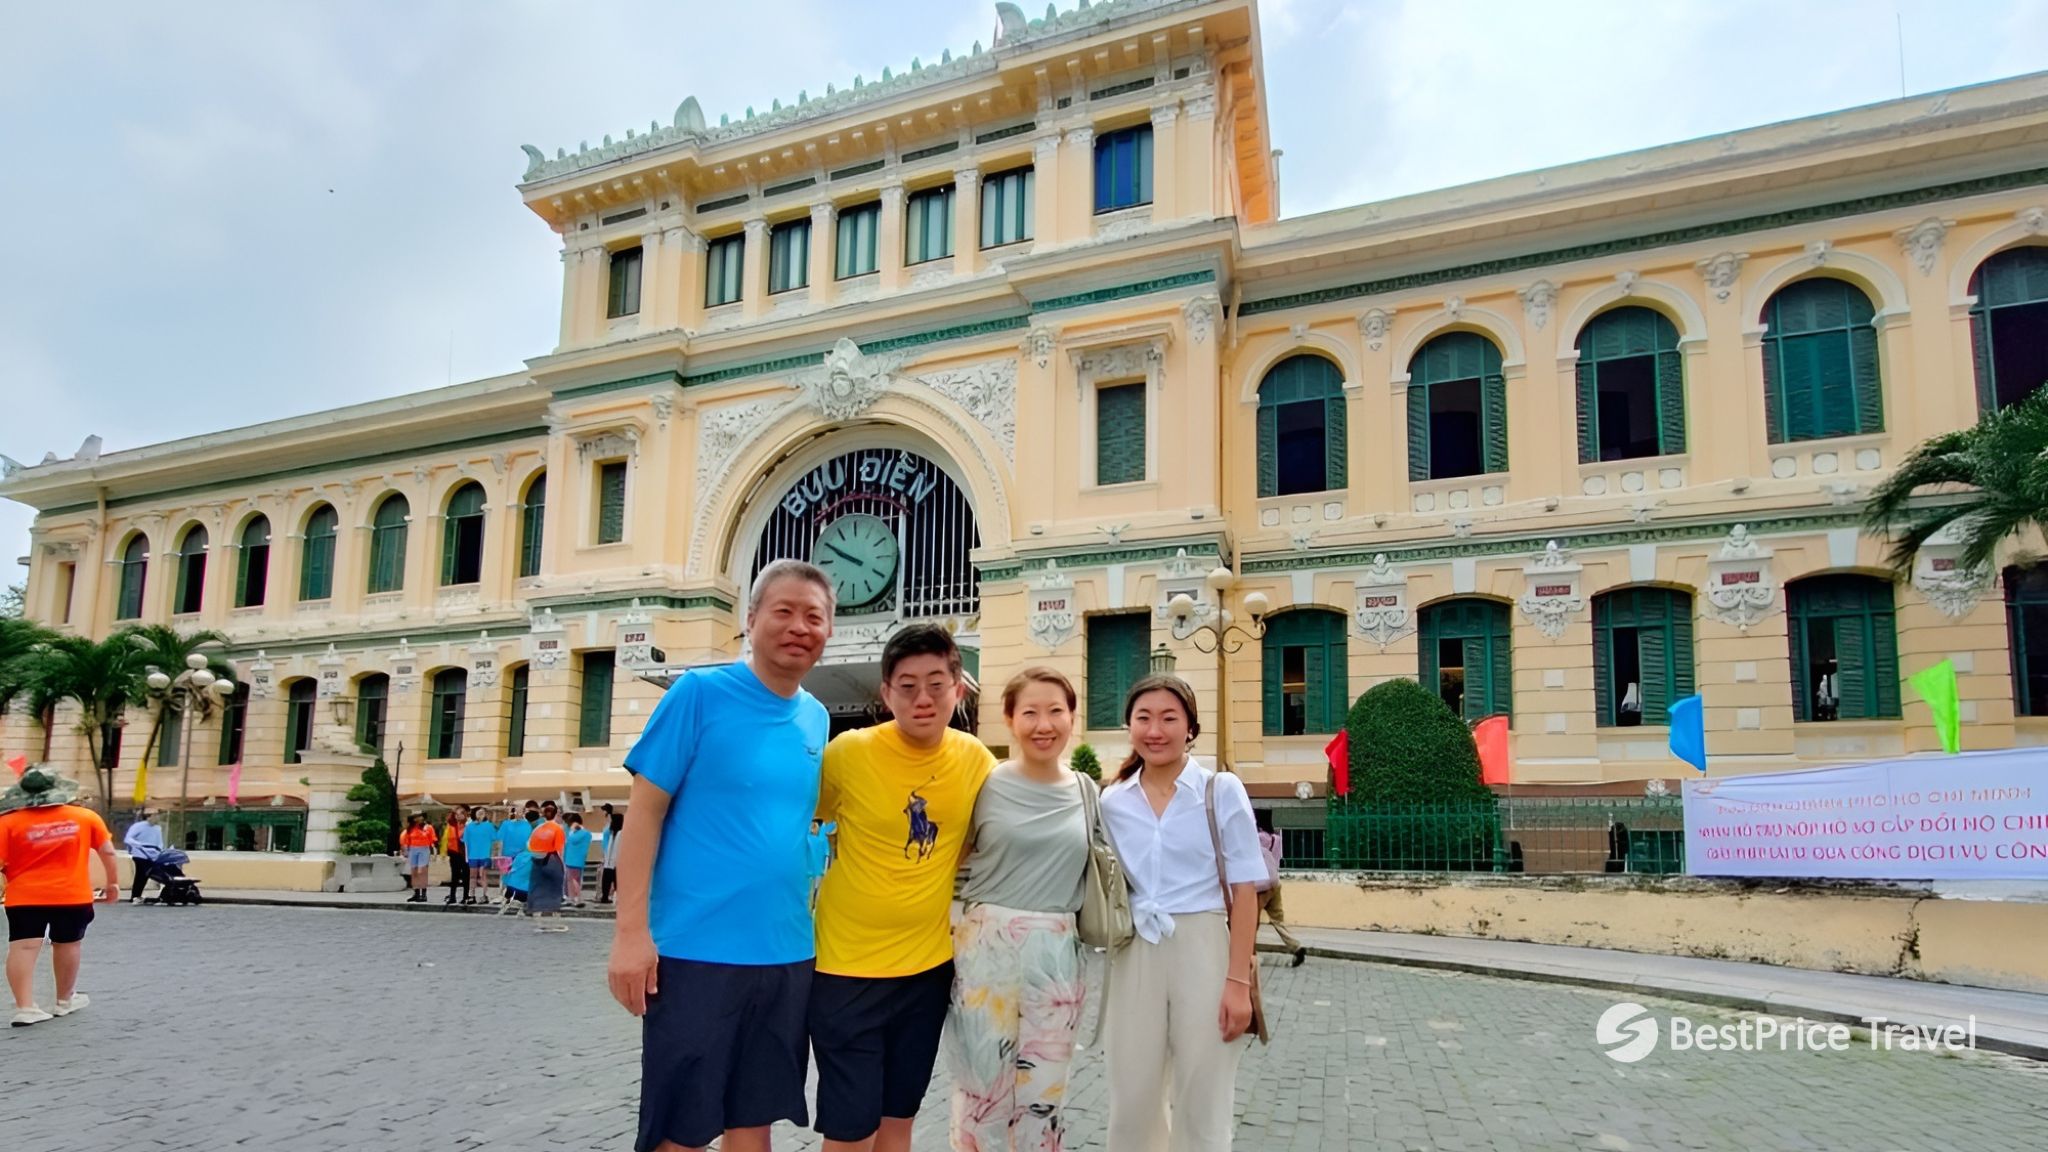 Day 15 Saigon Central Post Office Is One Of The Top Attractions In Ho Chi Minh City